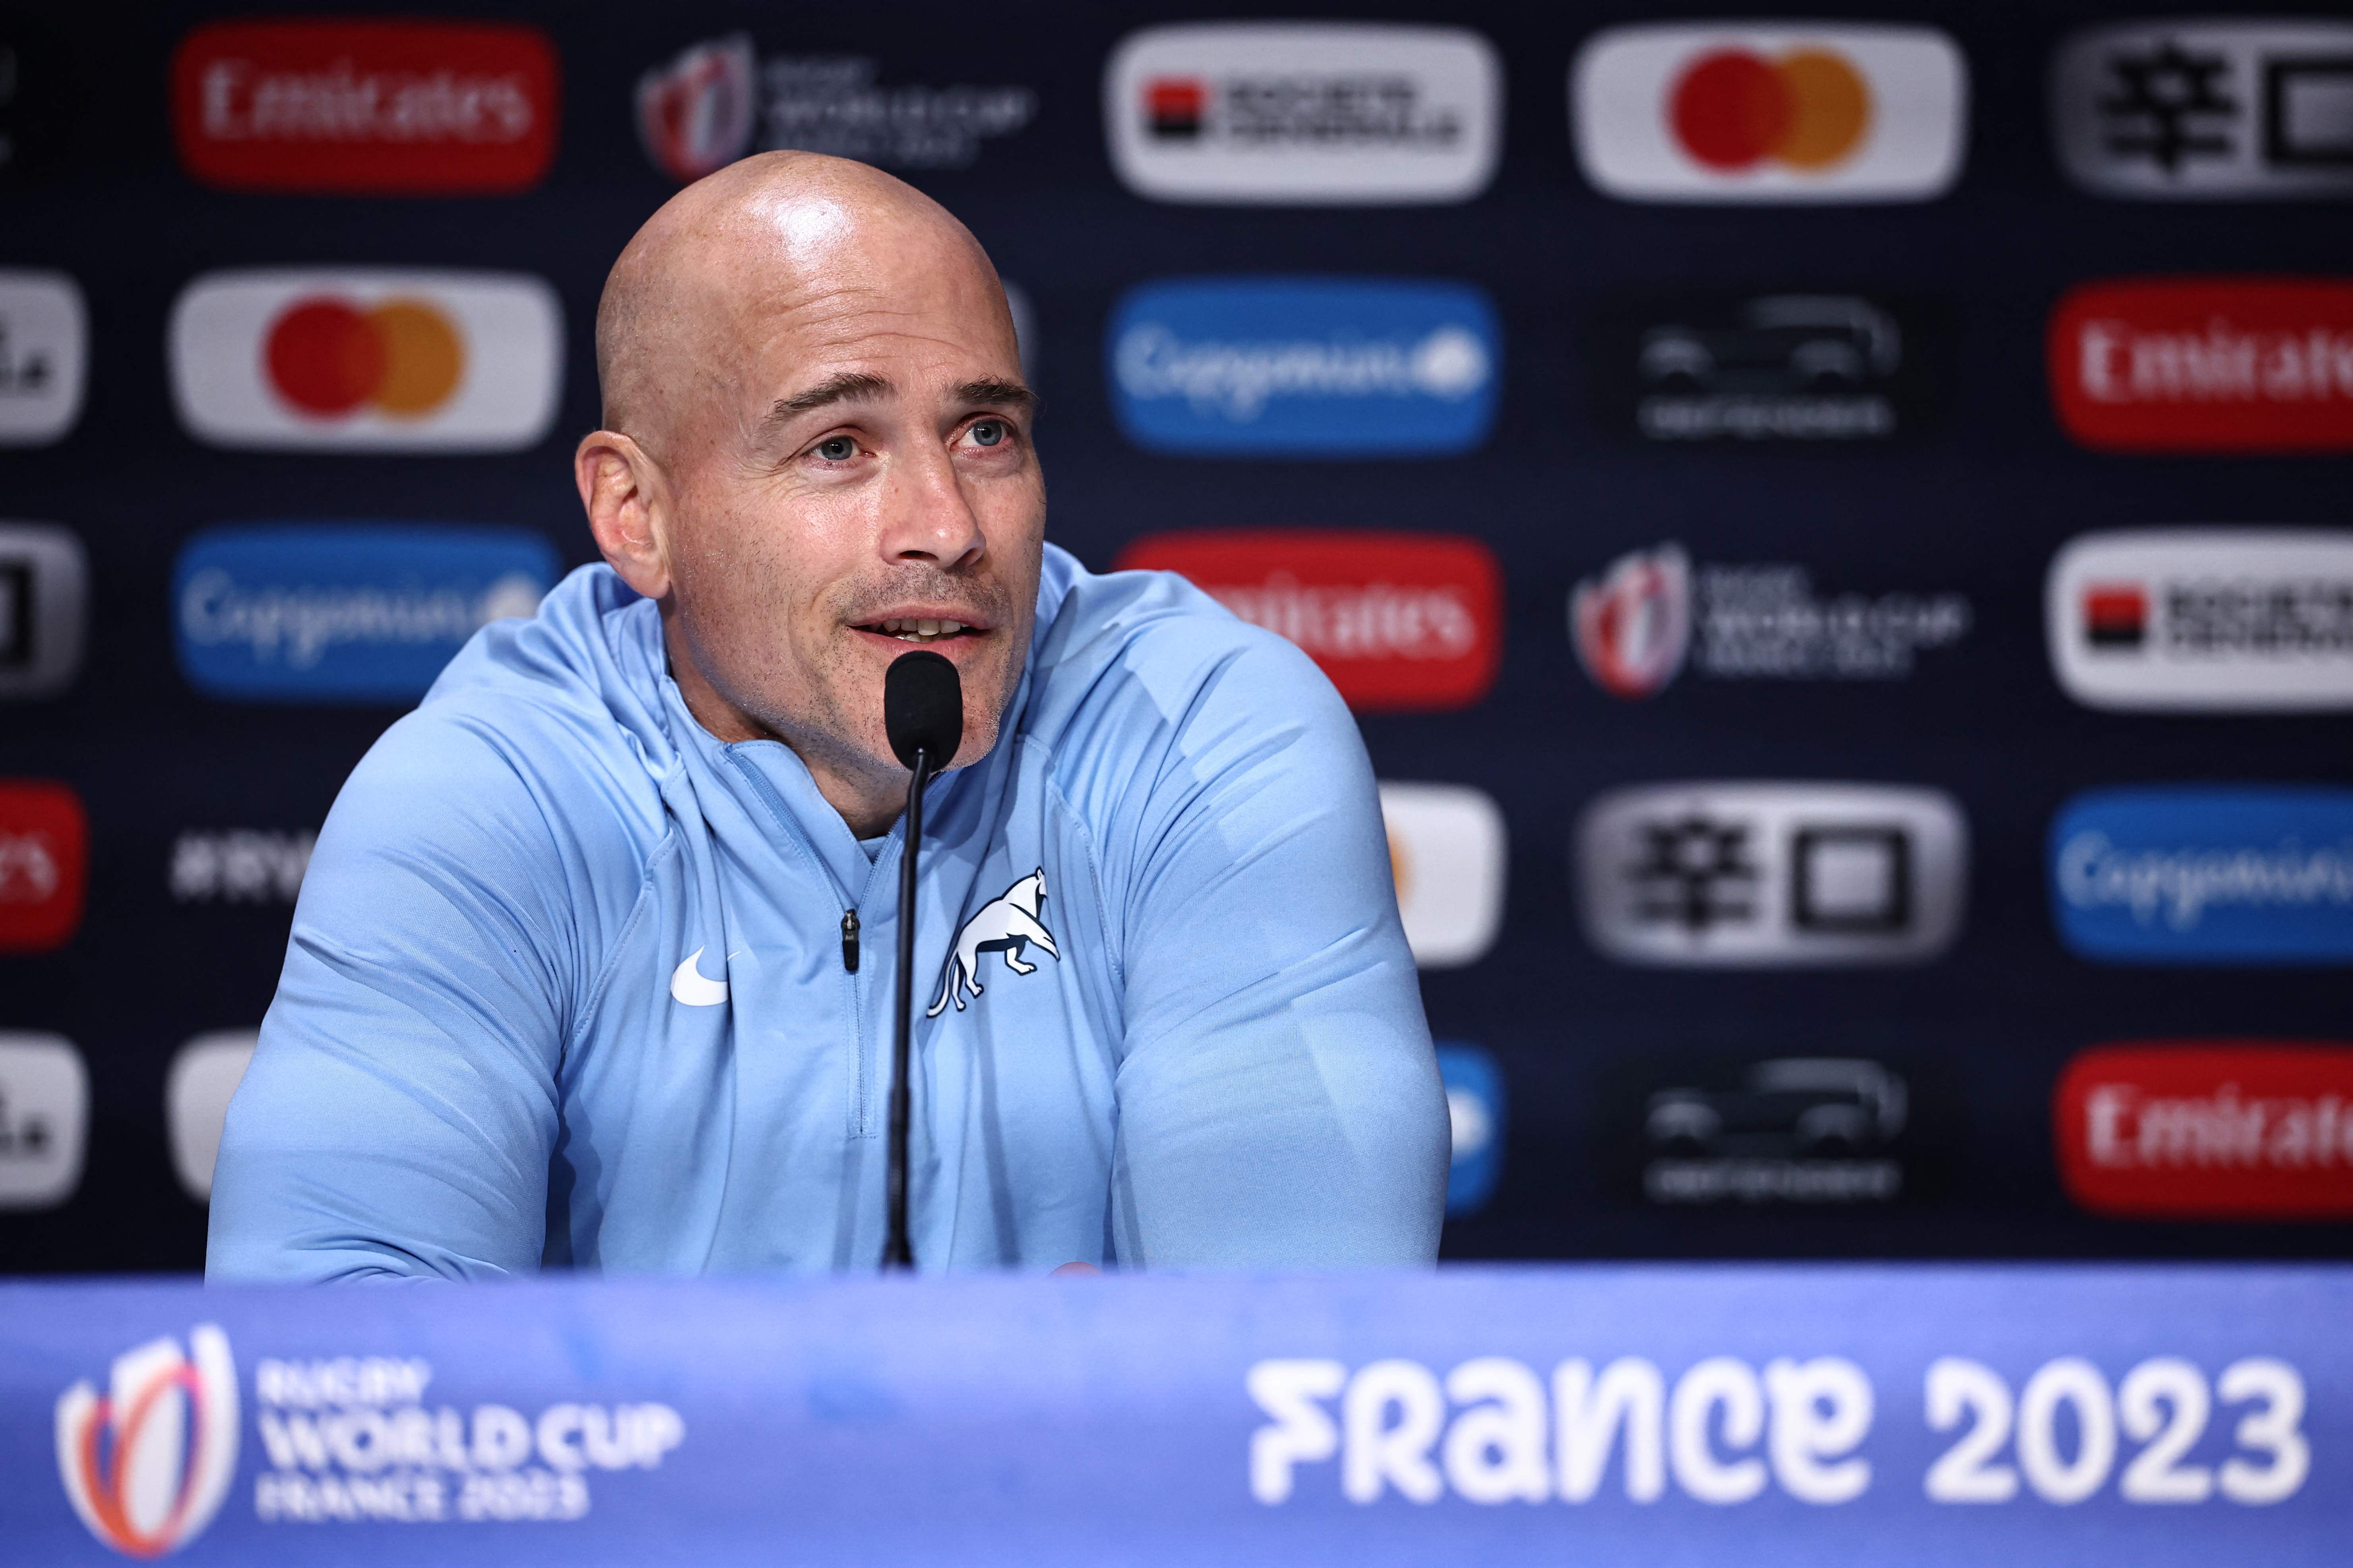 Argentina legend Felipe Contepomi will take over as Pumas coach after the World Cup